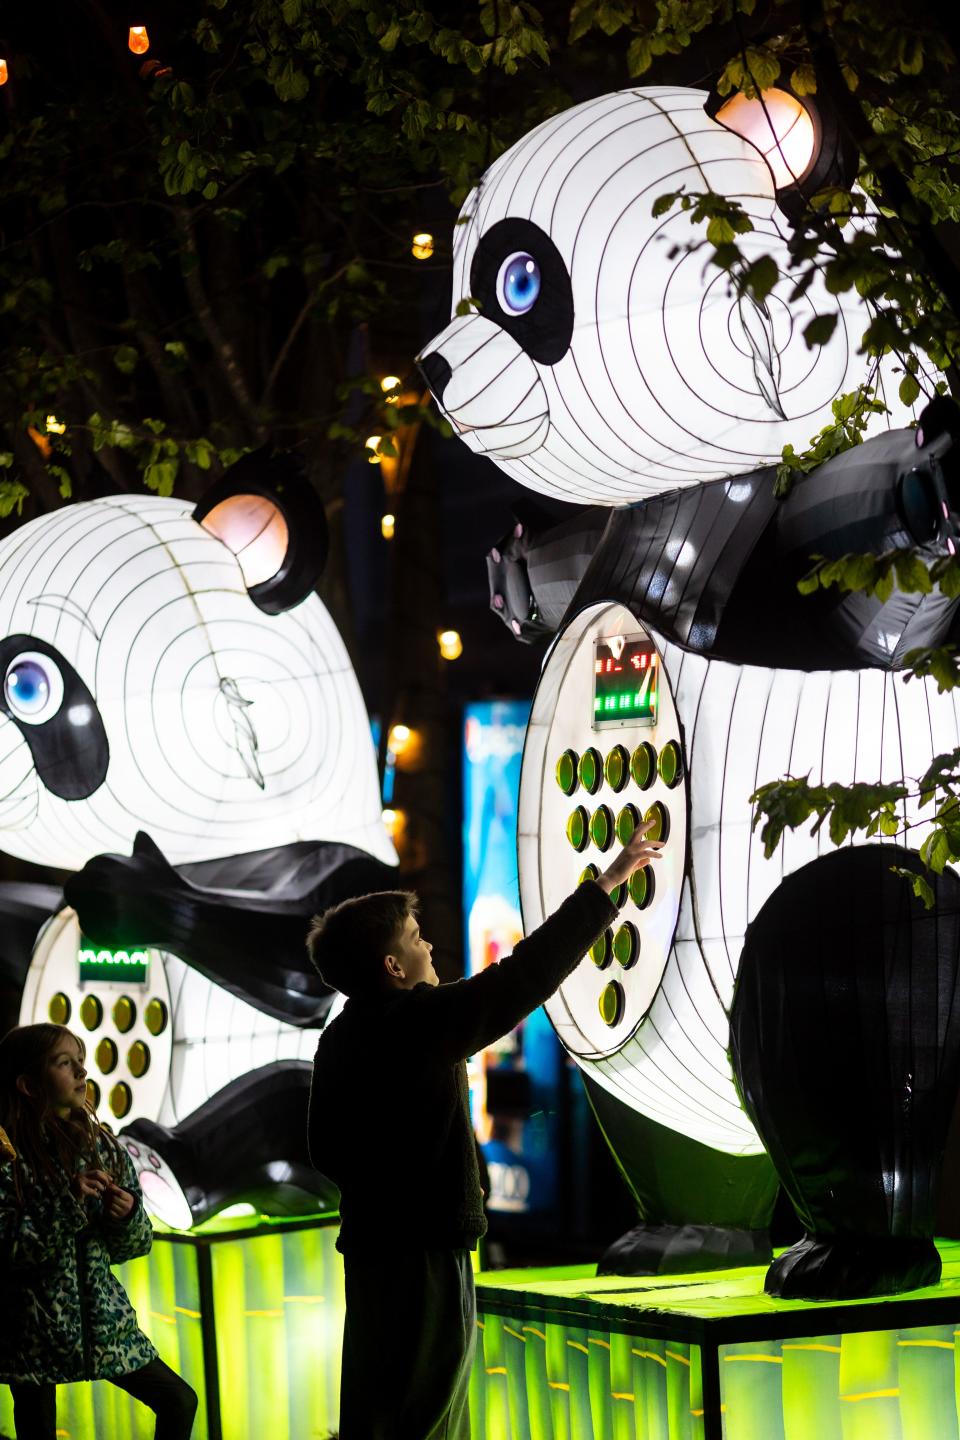 Mythical creatures, animal displays and handcrafted illuminated lanterns will light up Blank Park Zoo in 2024 when the Wild Lights Festival returns.